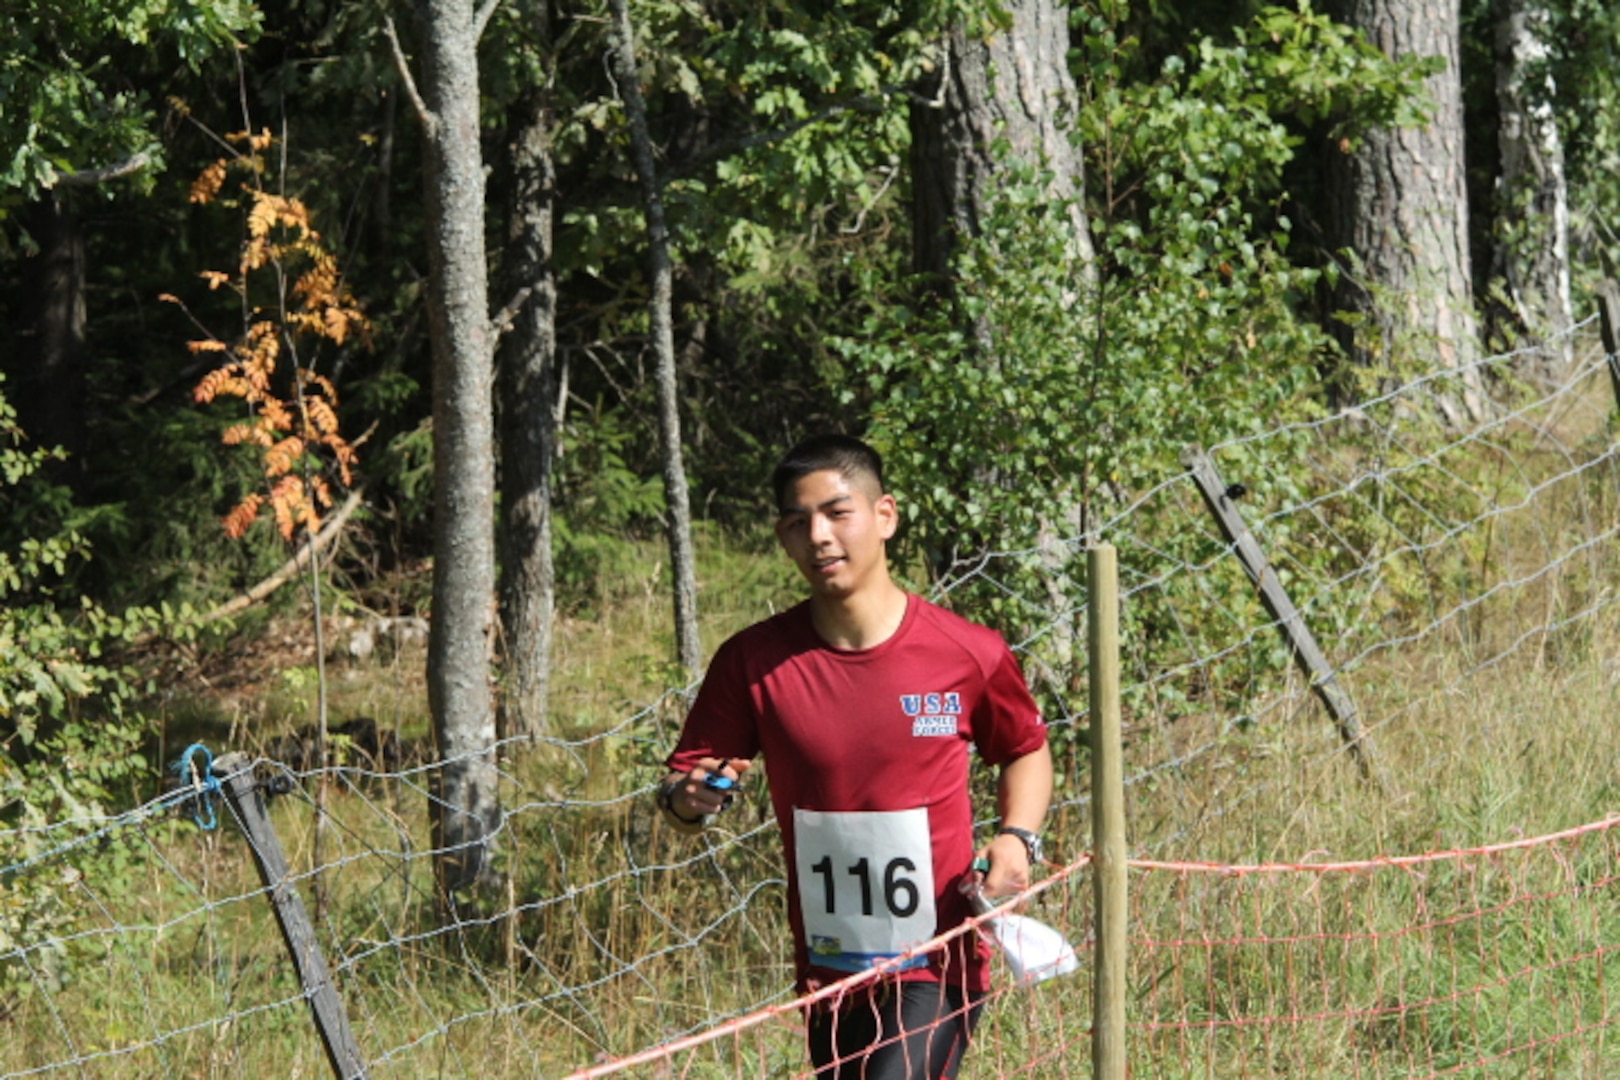 1LT Joshua Wang (Army) at the 2013 CISM World Orienteering Military Championship hosted by the Swedish Armed Forces in Eksjo, Sweden from 26 August to 1 September.